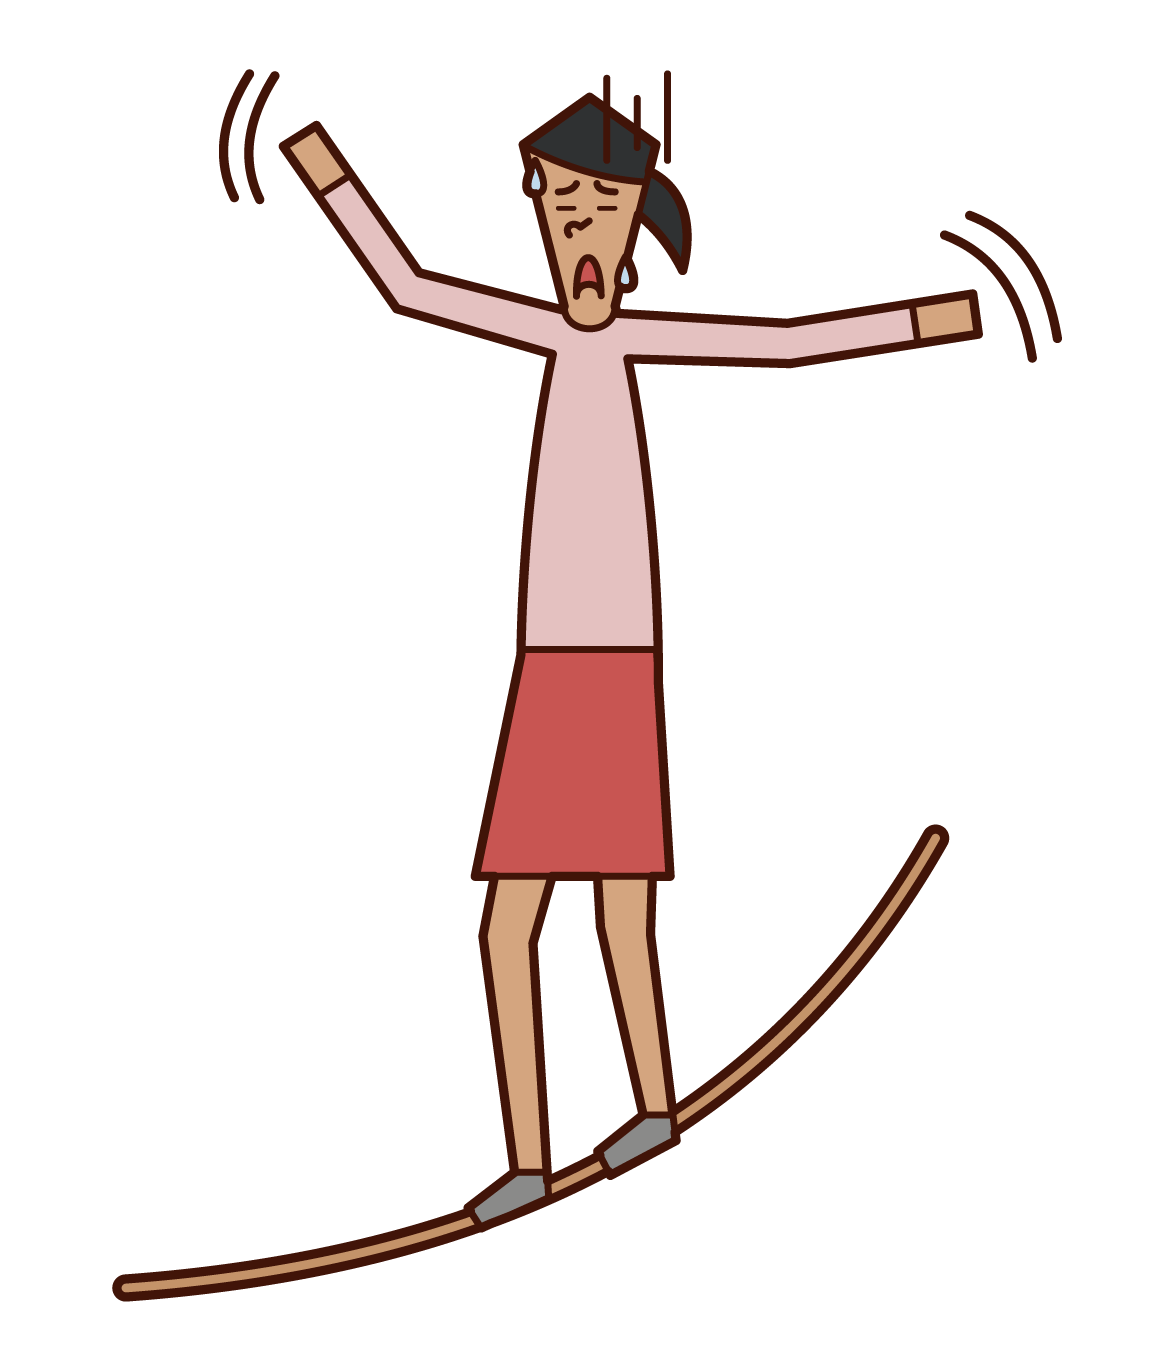 Illustration of a woman walking a tightrope